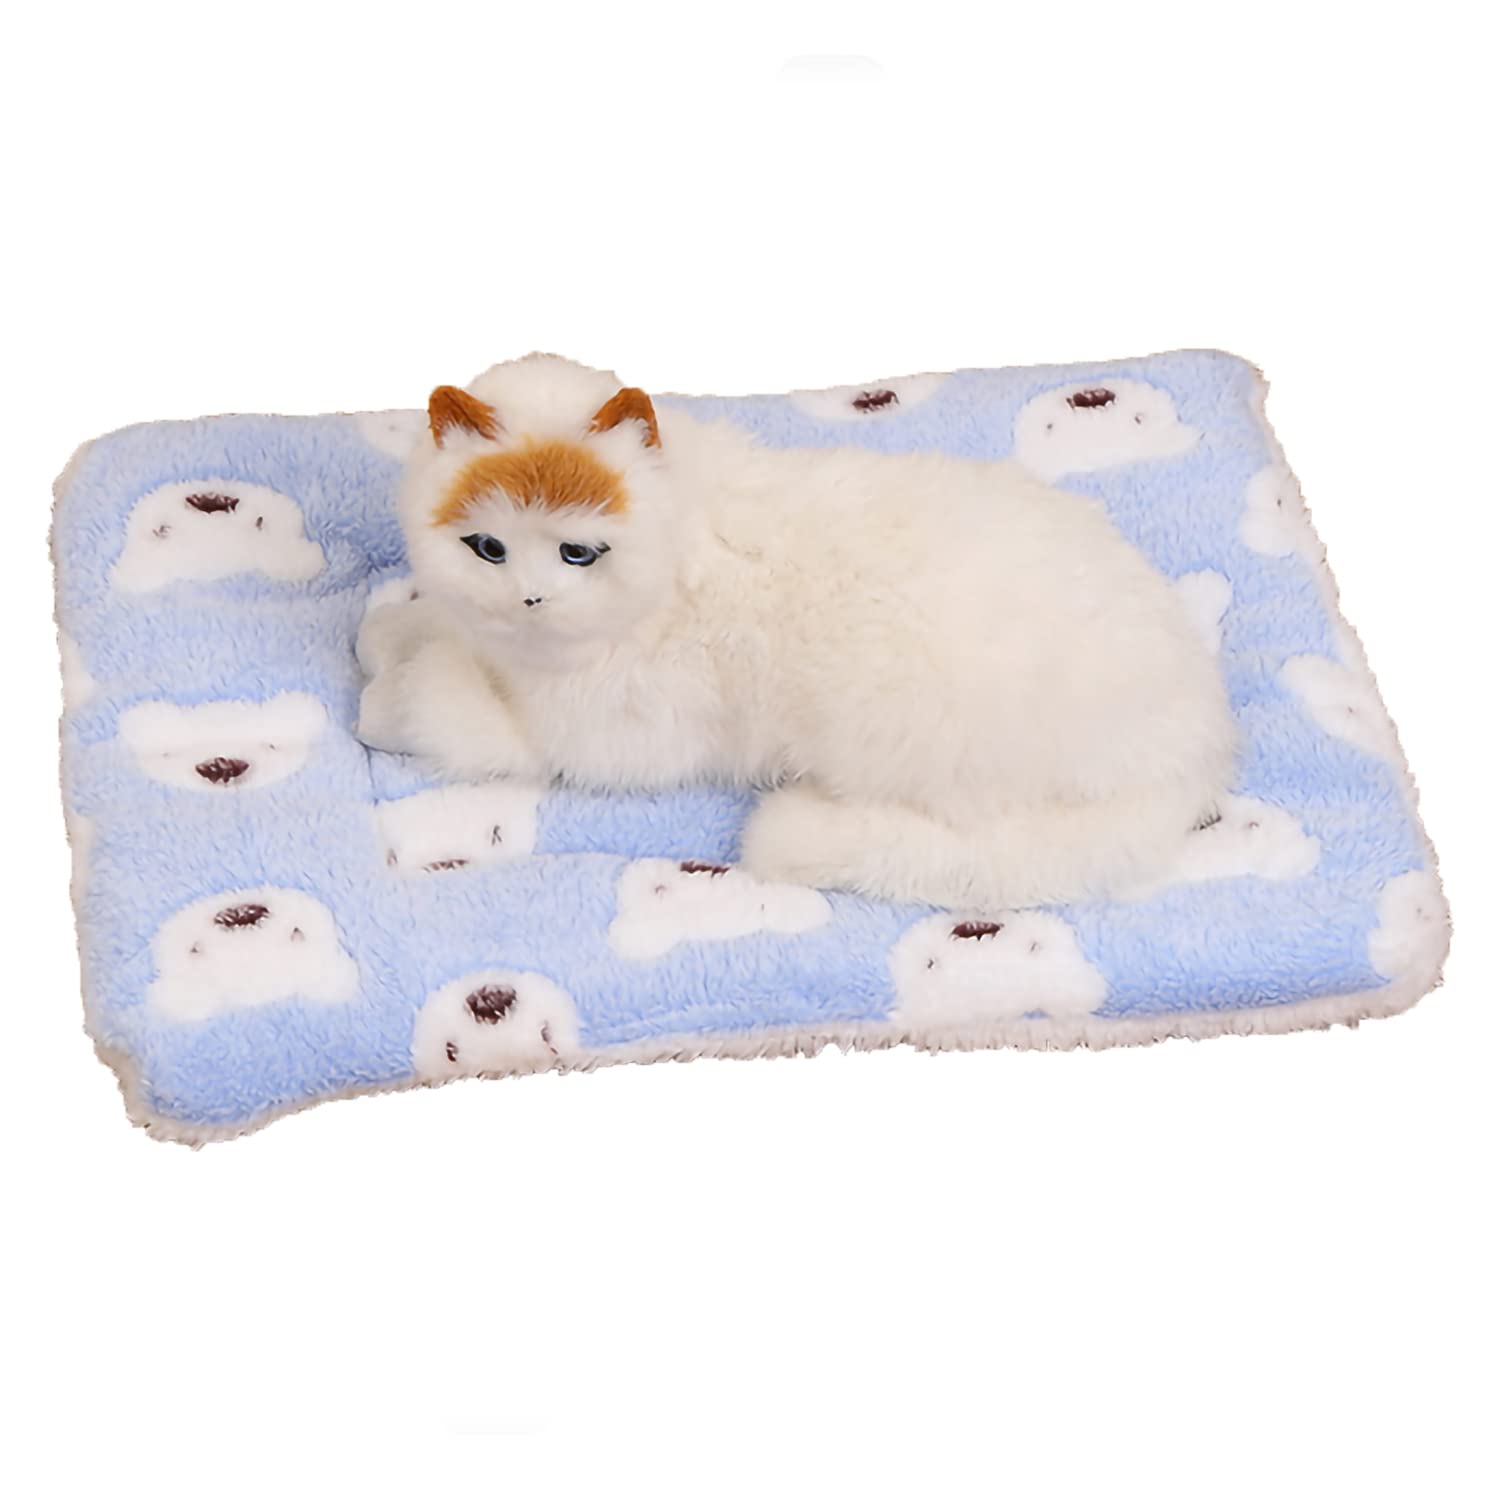 Uirpk Cozy Calming Cat Blanket,Cozy Cat Calming Blanket,Calming Blanket For Cats,Cozy Calming Cat Blanket For Anxiety And Stress